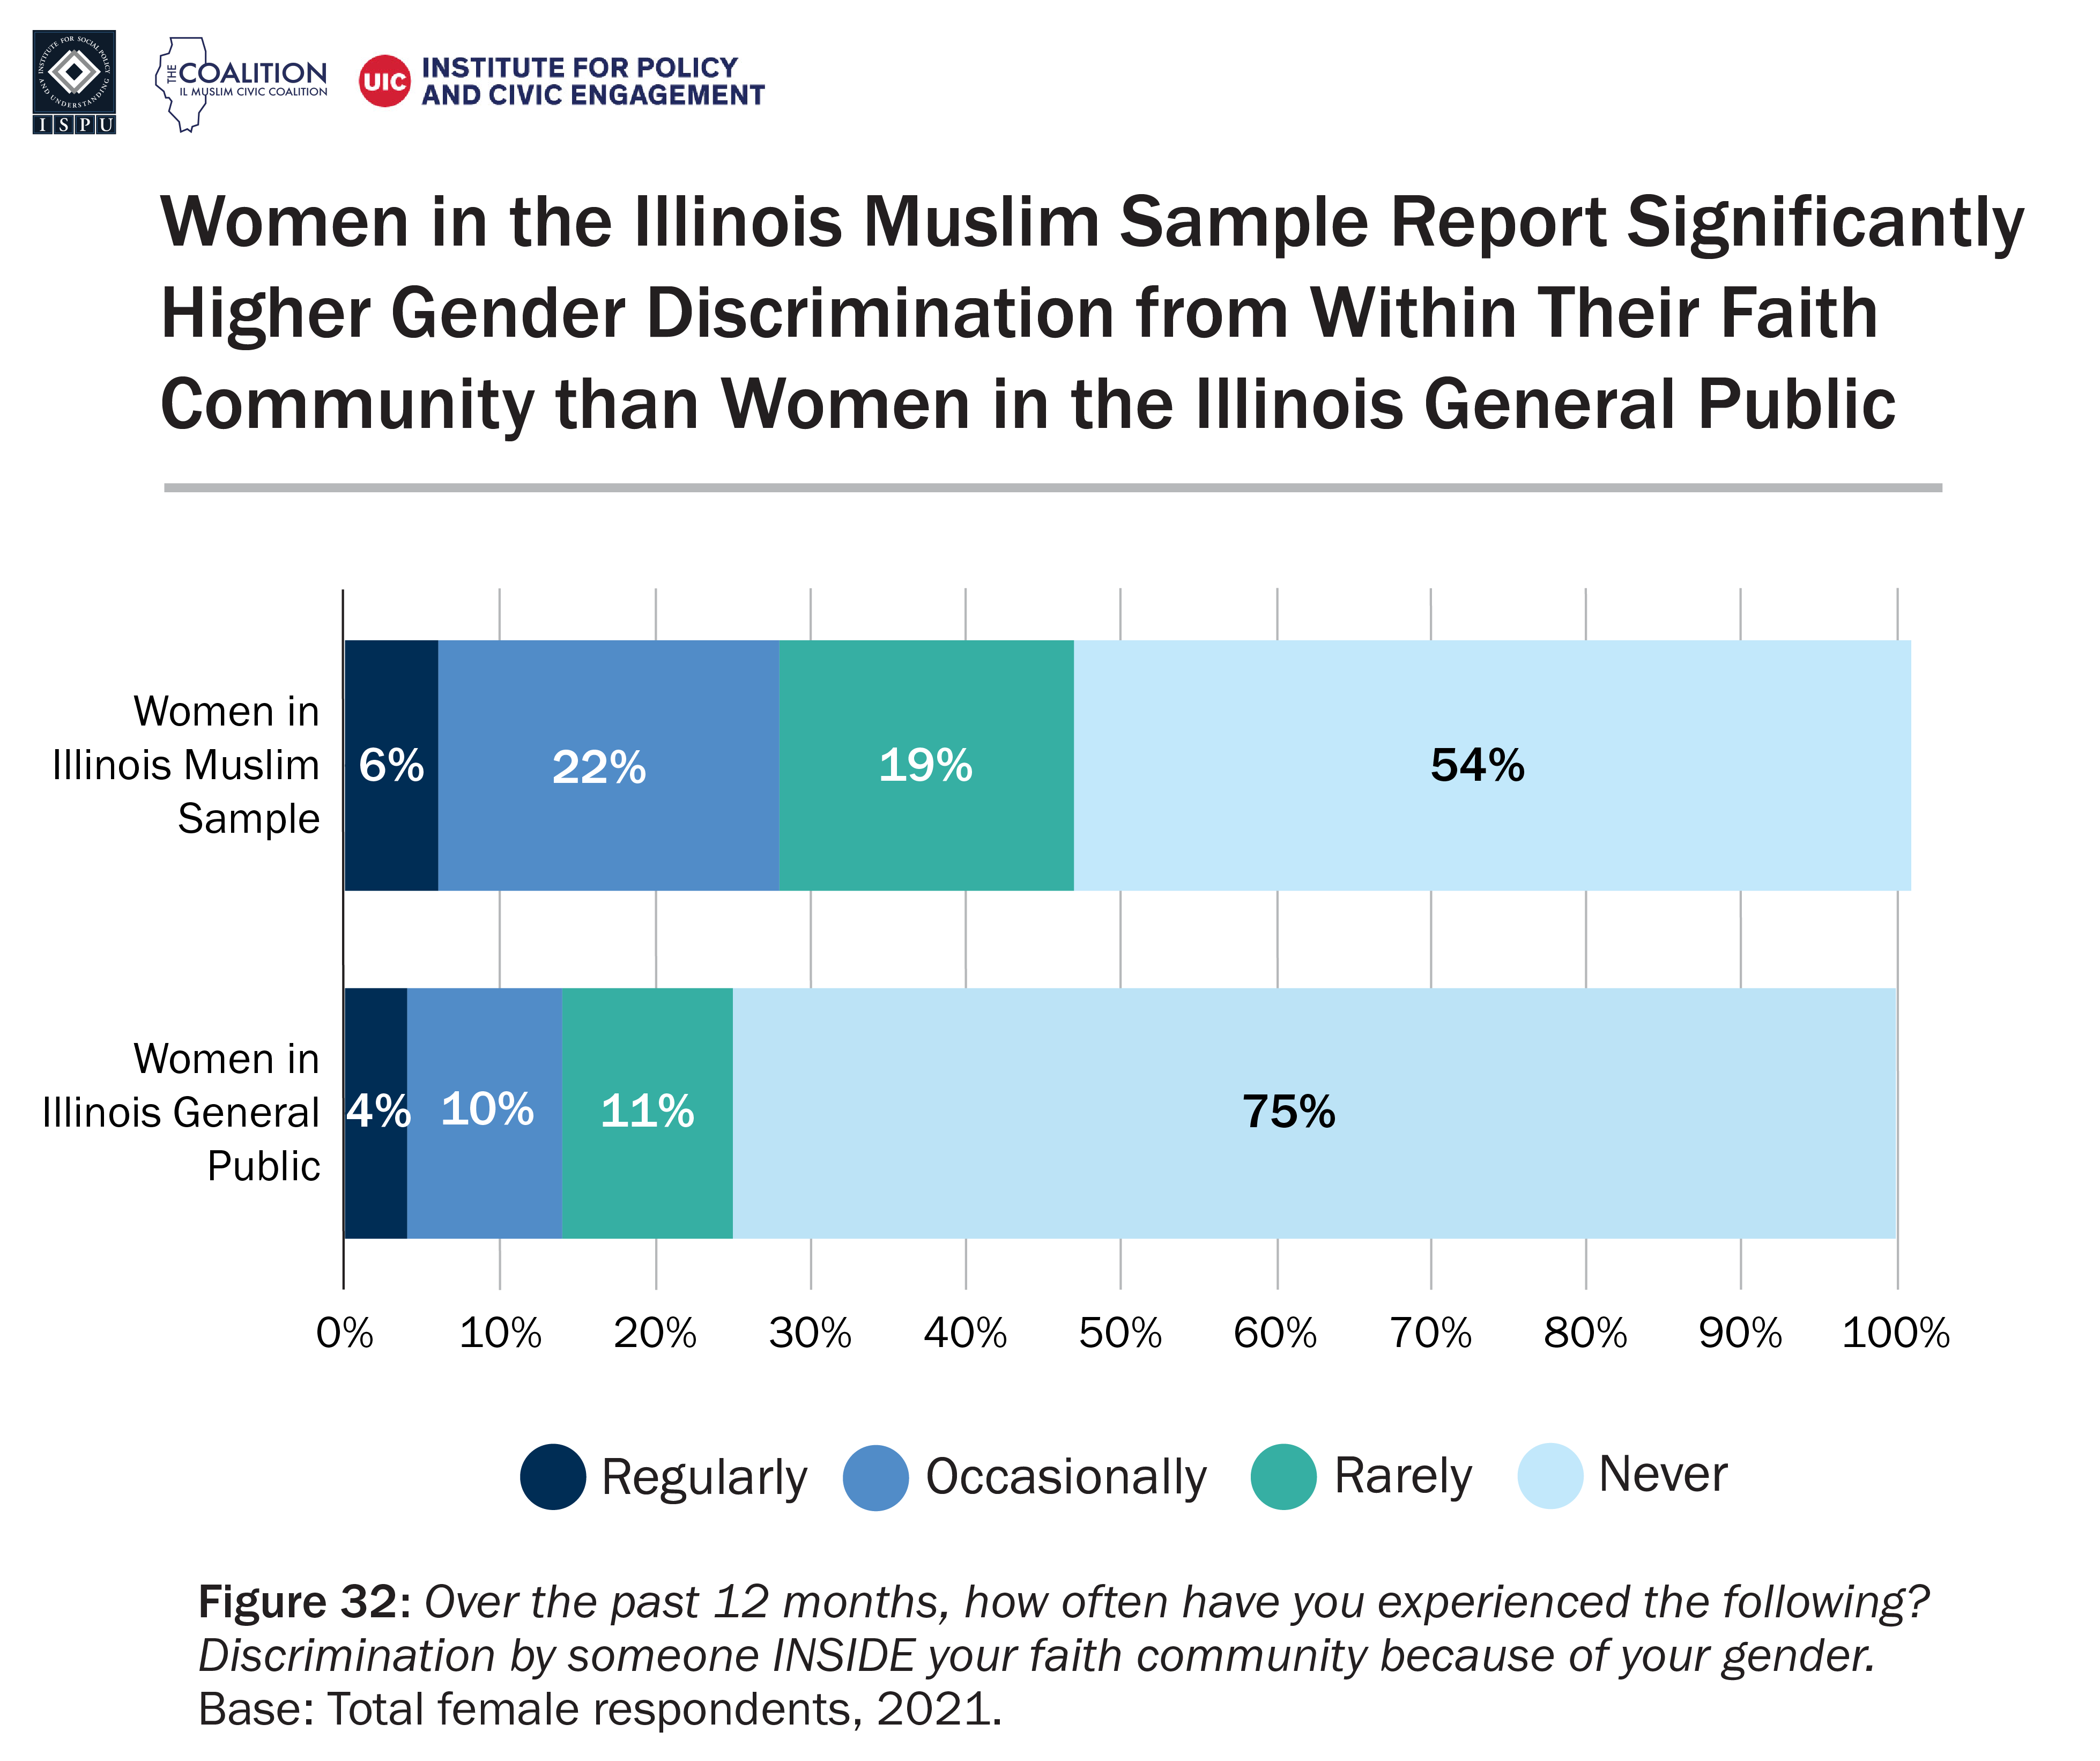 A bar graph showing the frequency of gender discrimination by someone inside faith community among women in the Illinois Muslim sample and women in the Illinois general public